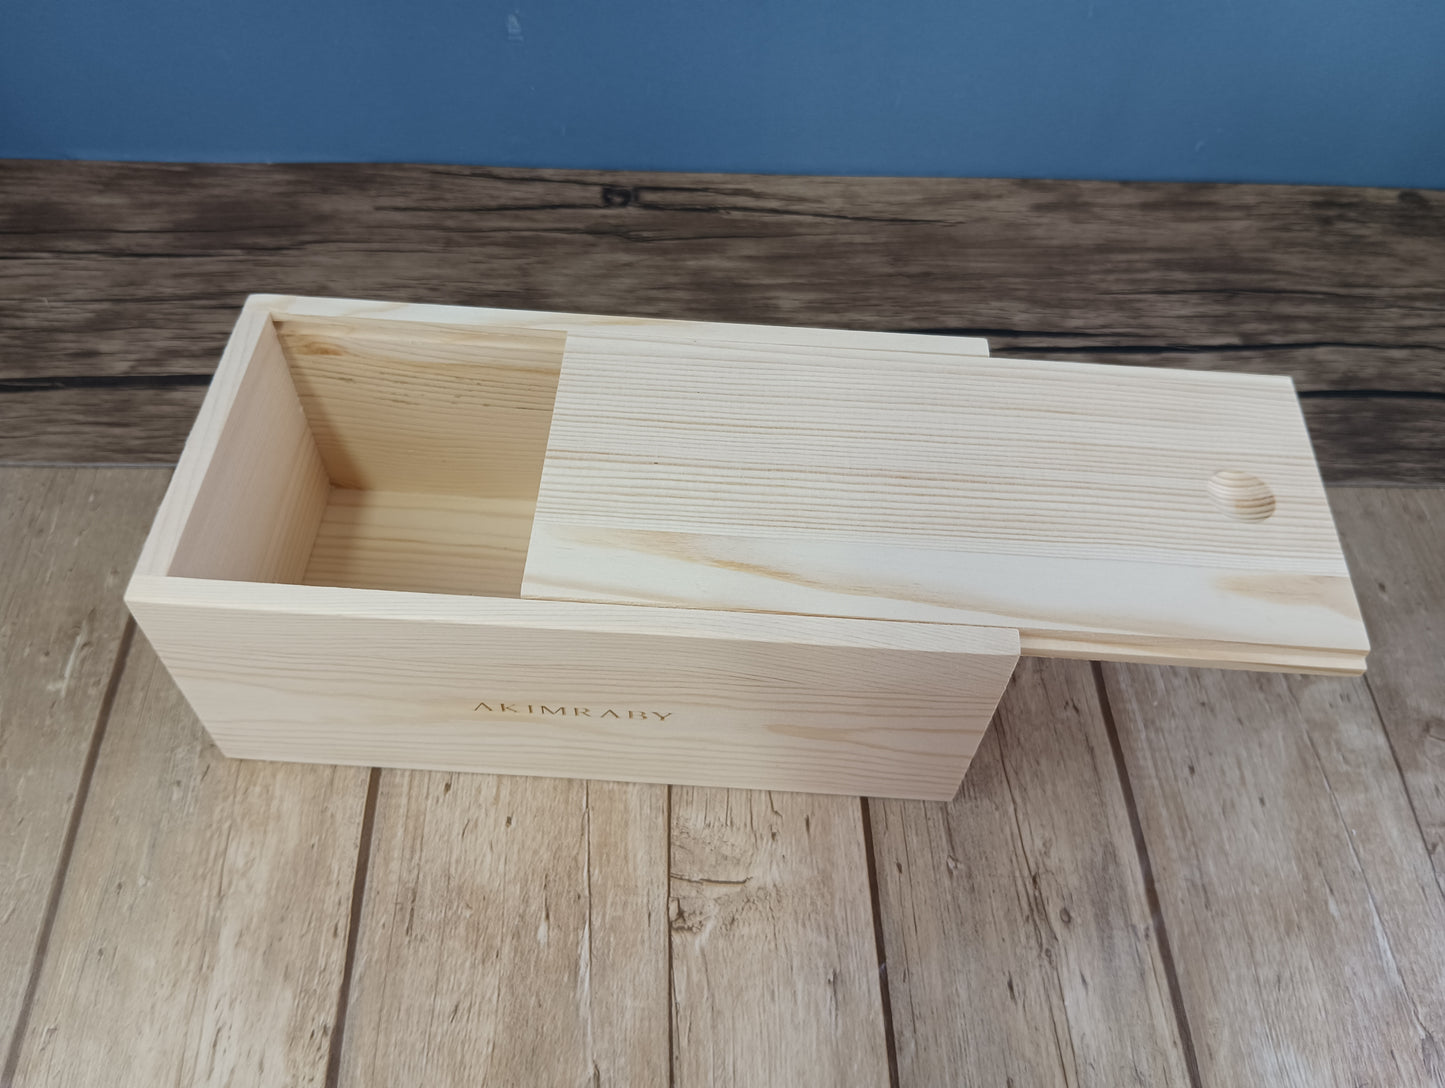 AKIMRABY Rectangular pull-out cover, solid wood box, wooden box, customized storage box, gift box, small wooden box